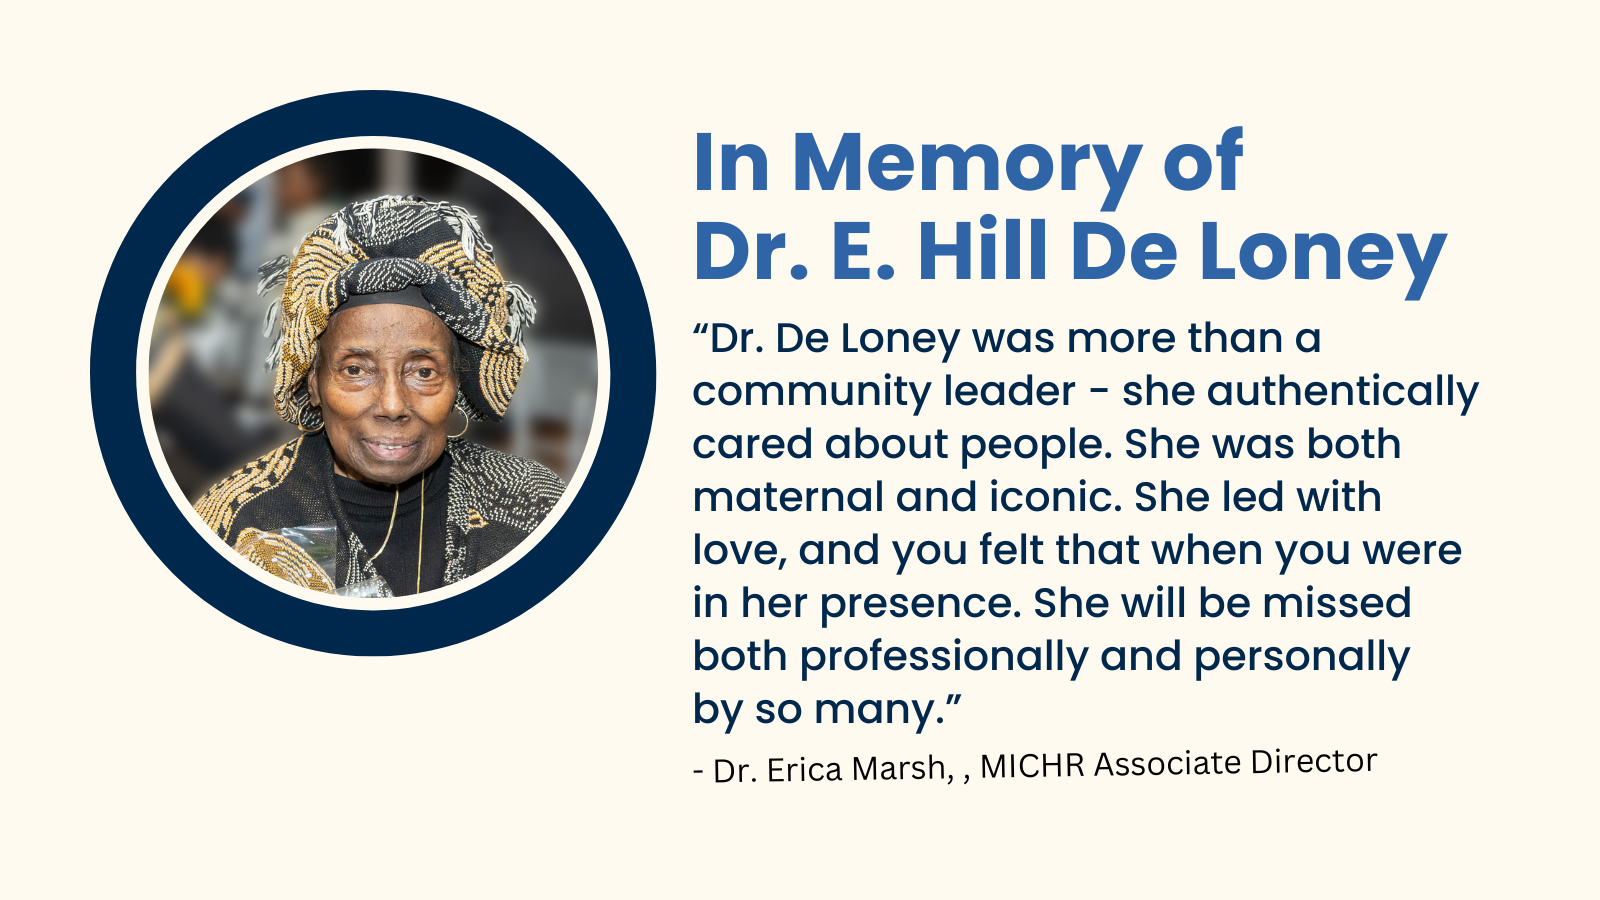 In Memory of Dr. E. Hill De Loney“Dr. De Loney was more than a community leader - she authentically cared about people. She was both maternal and iconic. She led with love, and you felt that when you were in her presence. She will be missed both professionally and personally by so many.”